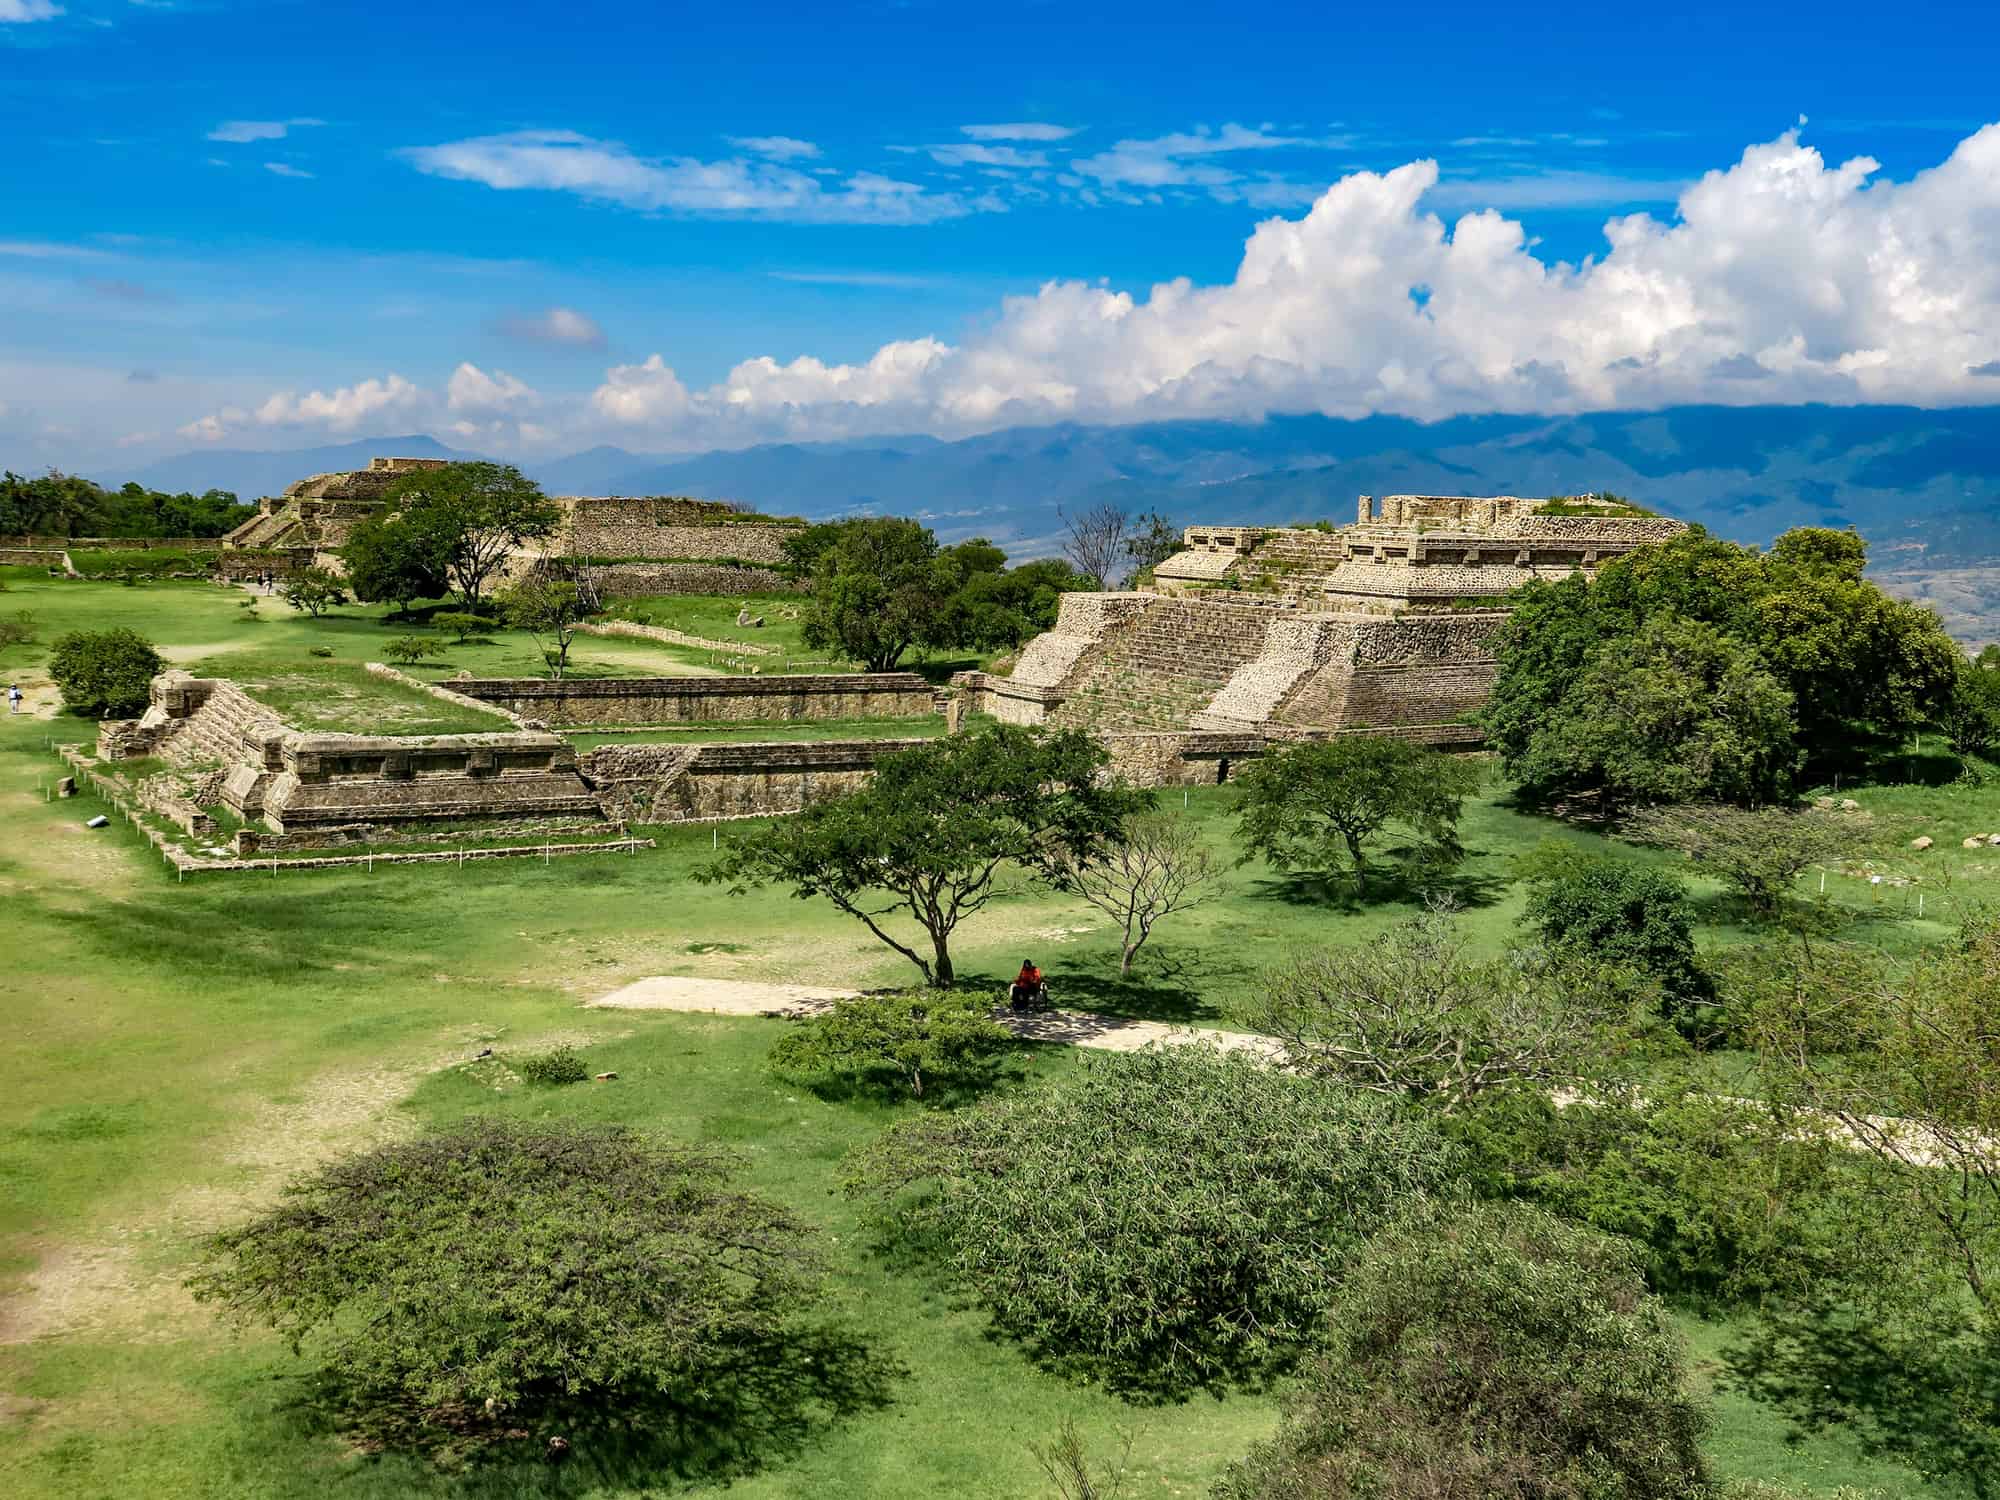 <p>The Zapotec people built the pyramids located in Monte Albán. About 2,500 years ago, they inhabited the area of what is now Oaxaca. Fascinatingly enough, one of the few tribes that had developed a writing system in the western part of the world. Monte Albán was the capital of the Zapotecs. It is believed they were trading partners with those tribes that lived in Teotihuacan. When you visit, you can explore all the ruins in the ancient city, which houses tombs, temples, and even stone carvings.</p>